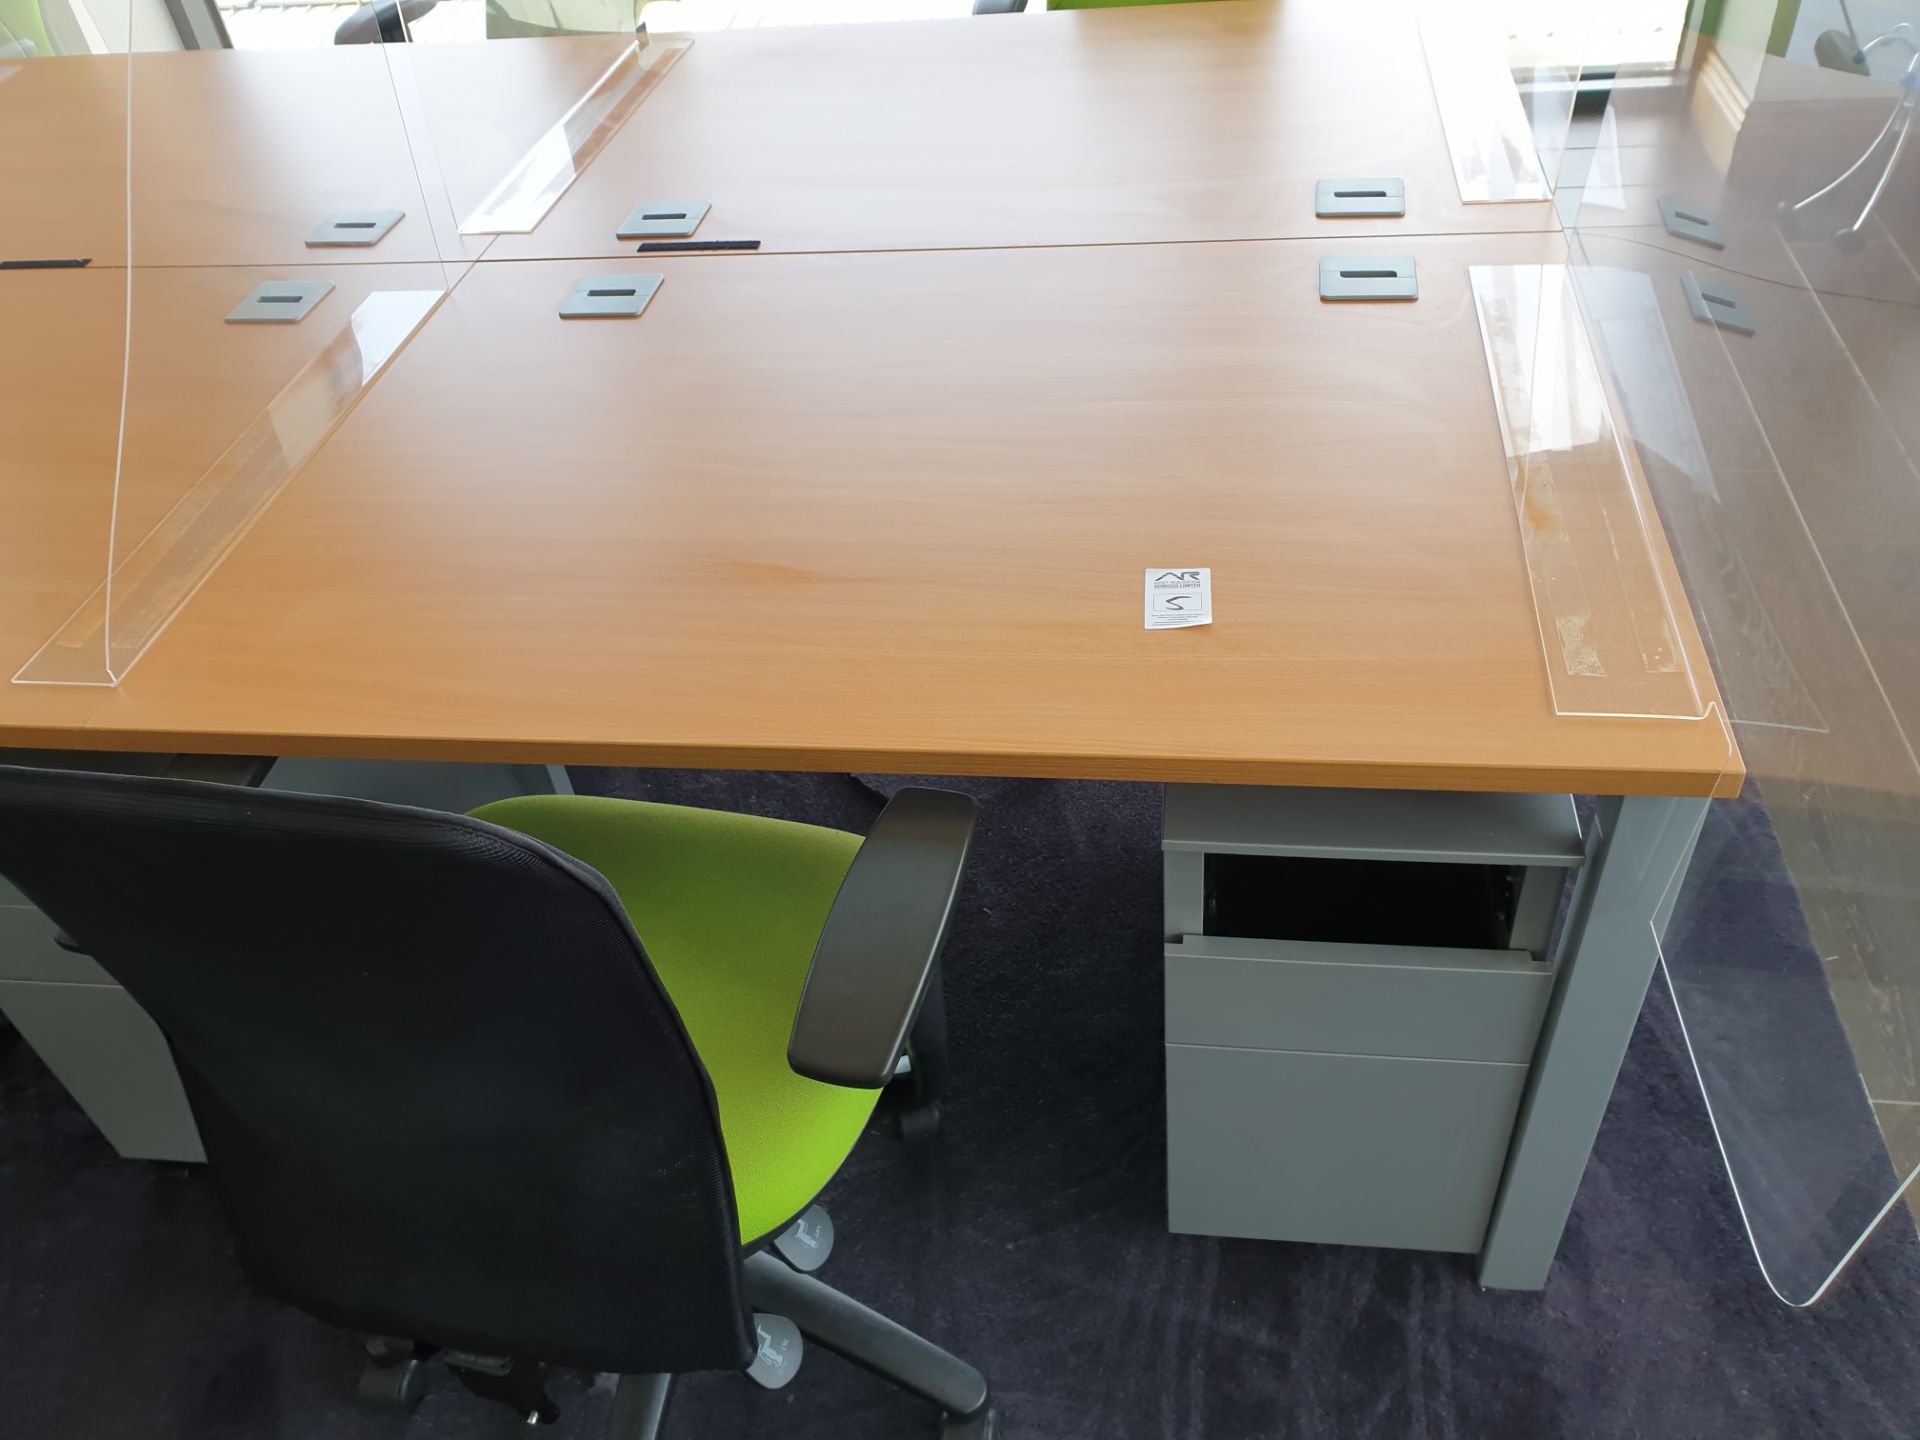 14 Person Workstation / Desks with covid screens - Image 2 of 4